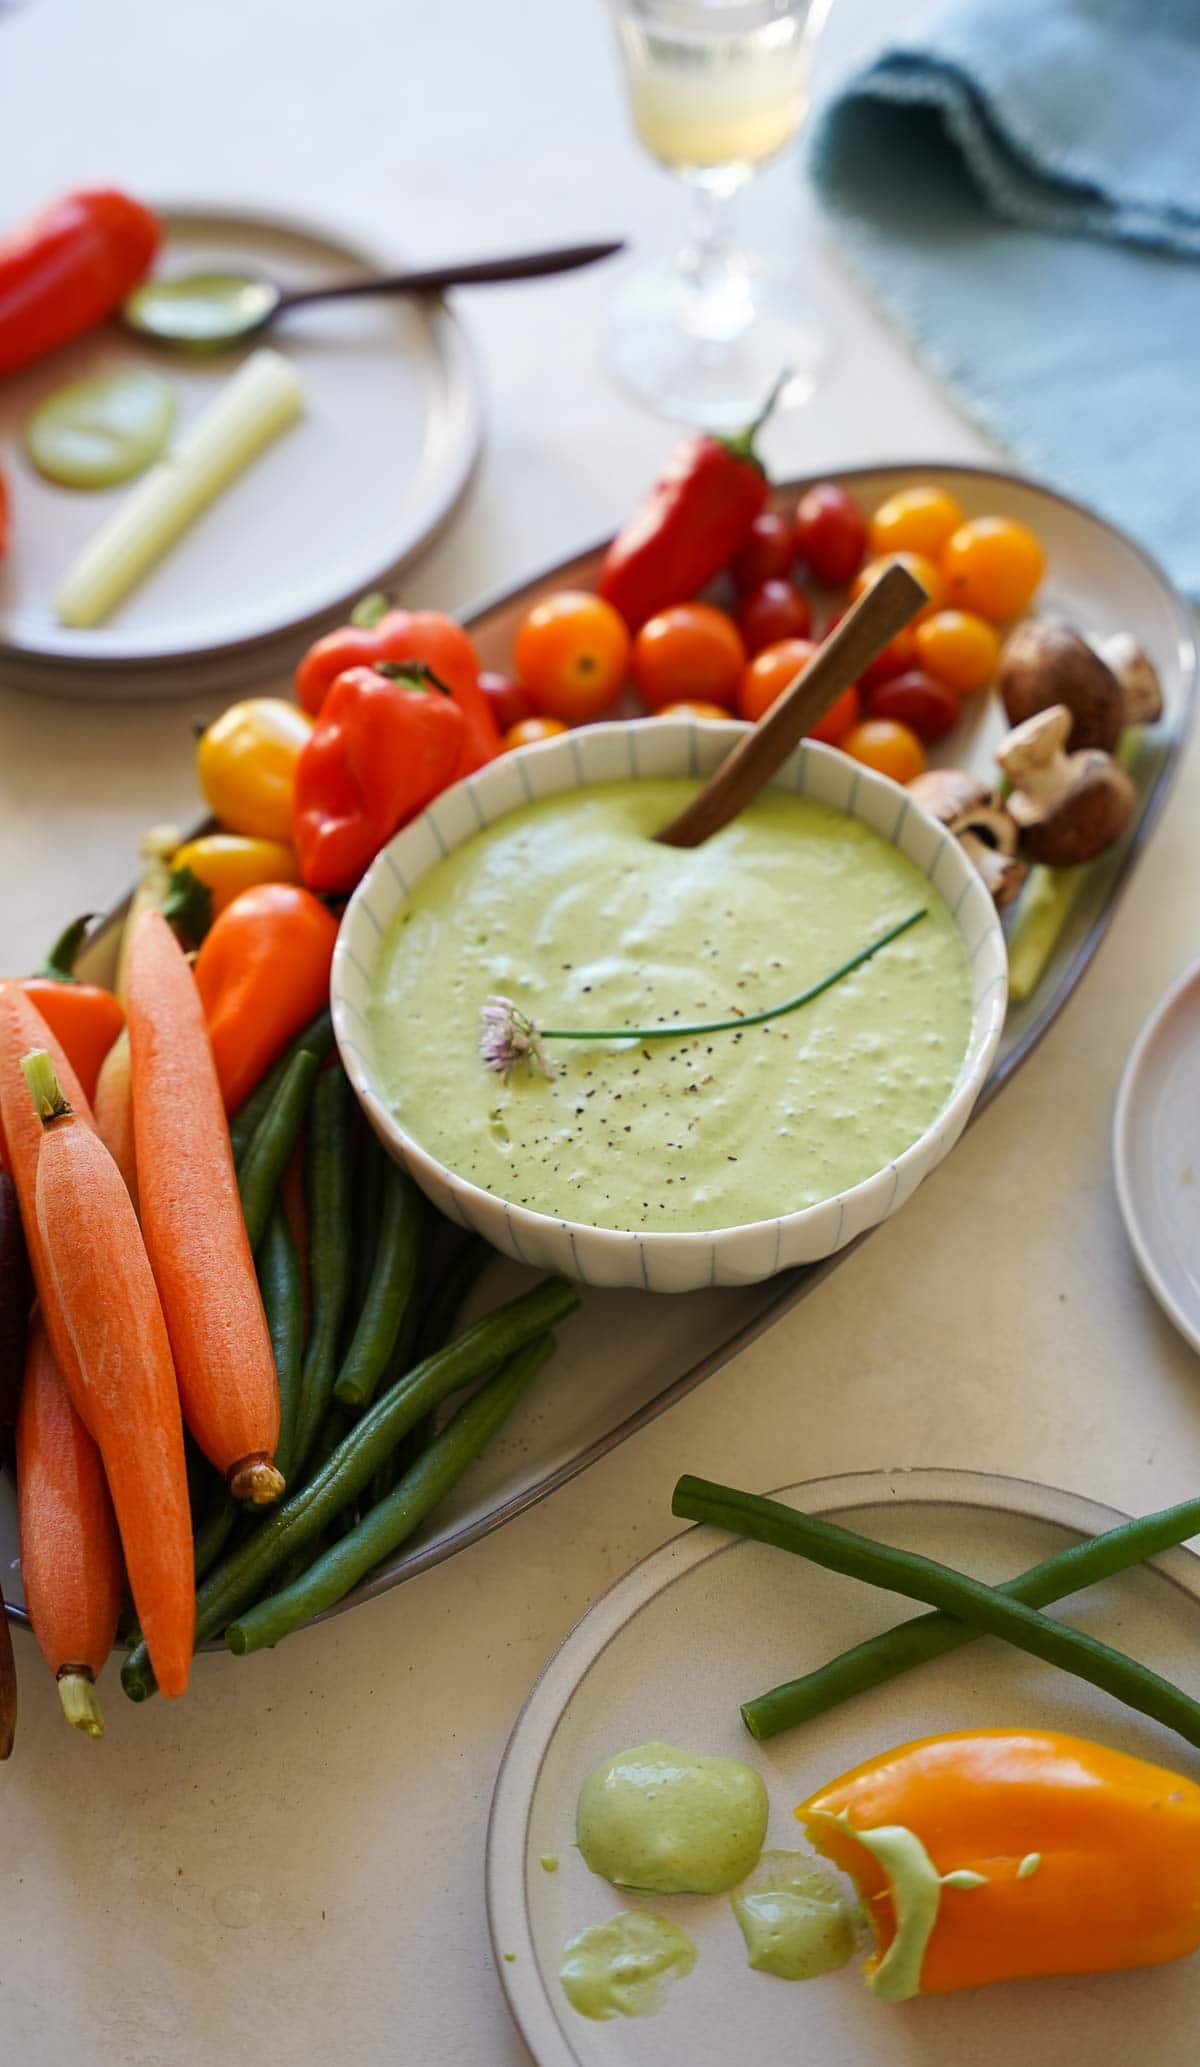 A crudite platter with green goddess dressing in a bowl with vegetables and appetizer plates.